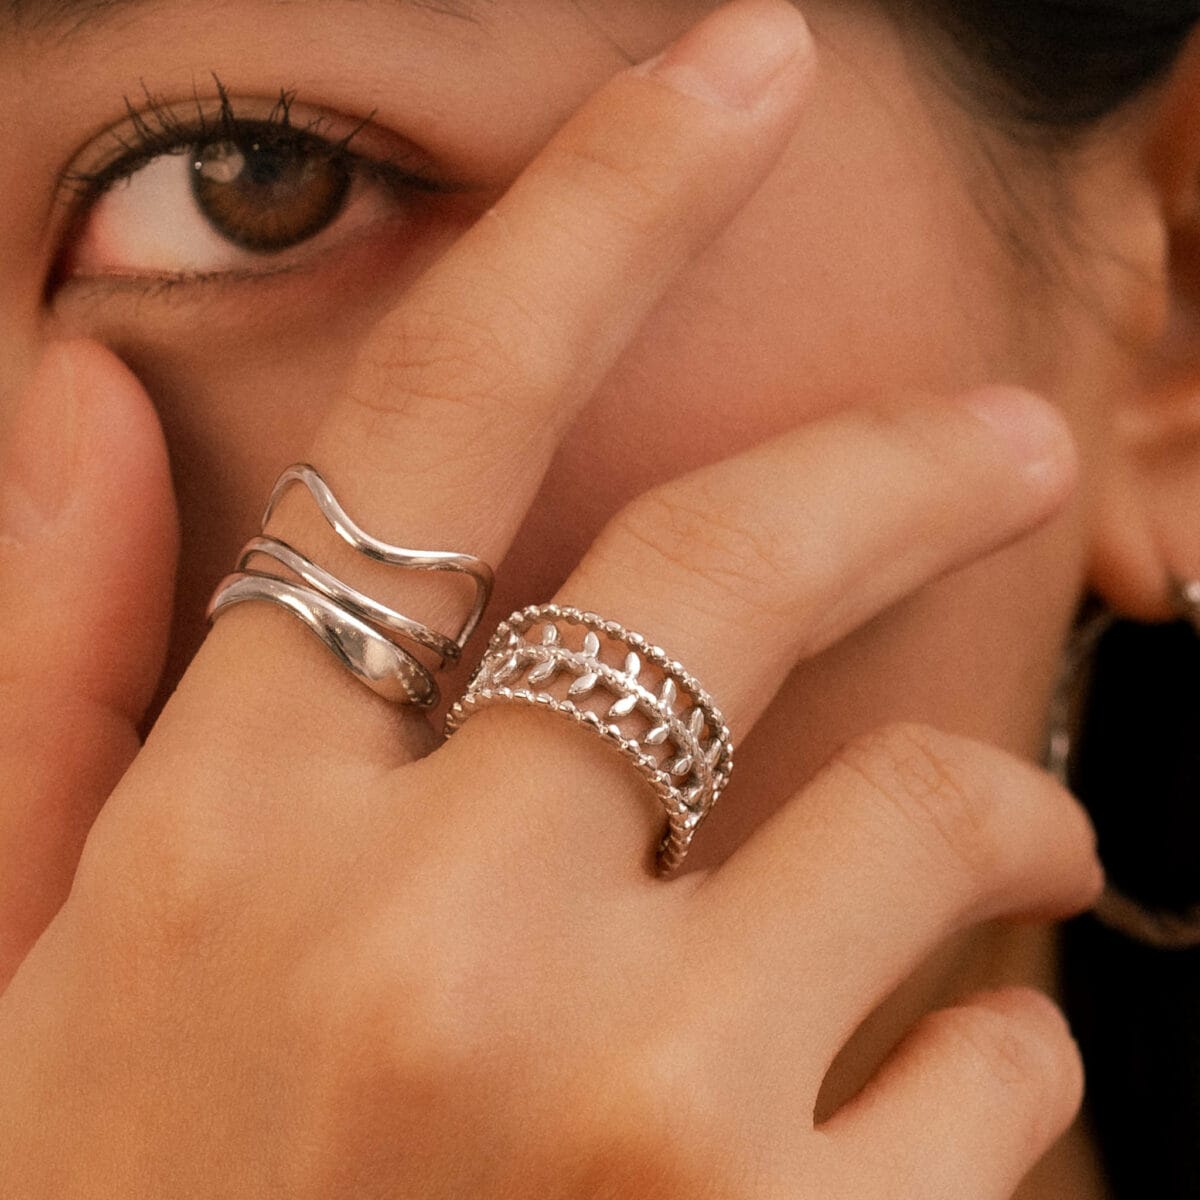 https://m.clubbella.co/product/eternal-foliage-silver-ring/ Aura Spiral and Eternal Foliage Silver RIng (2)